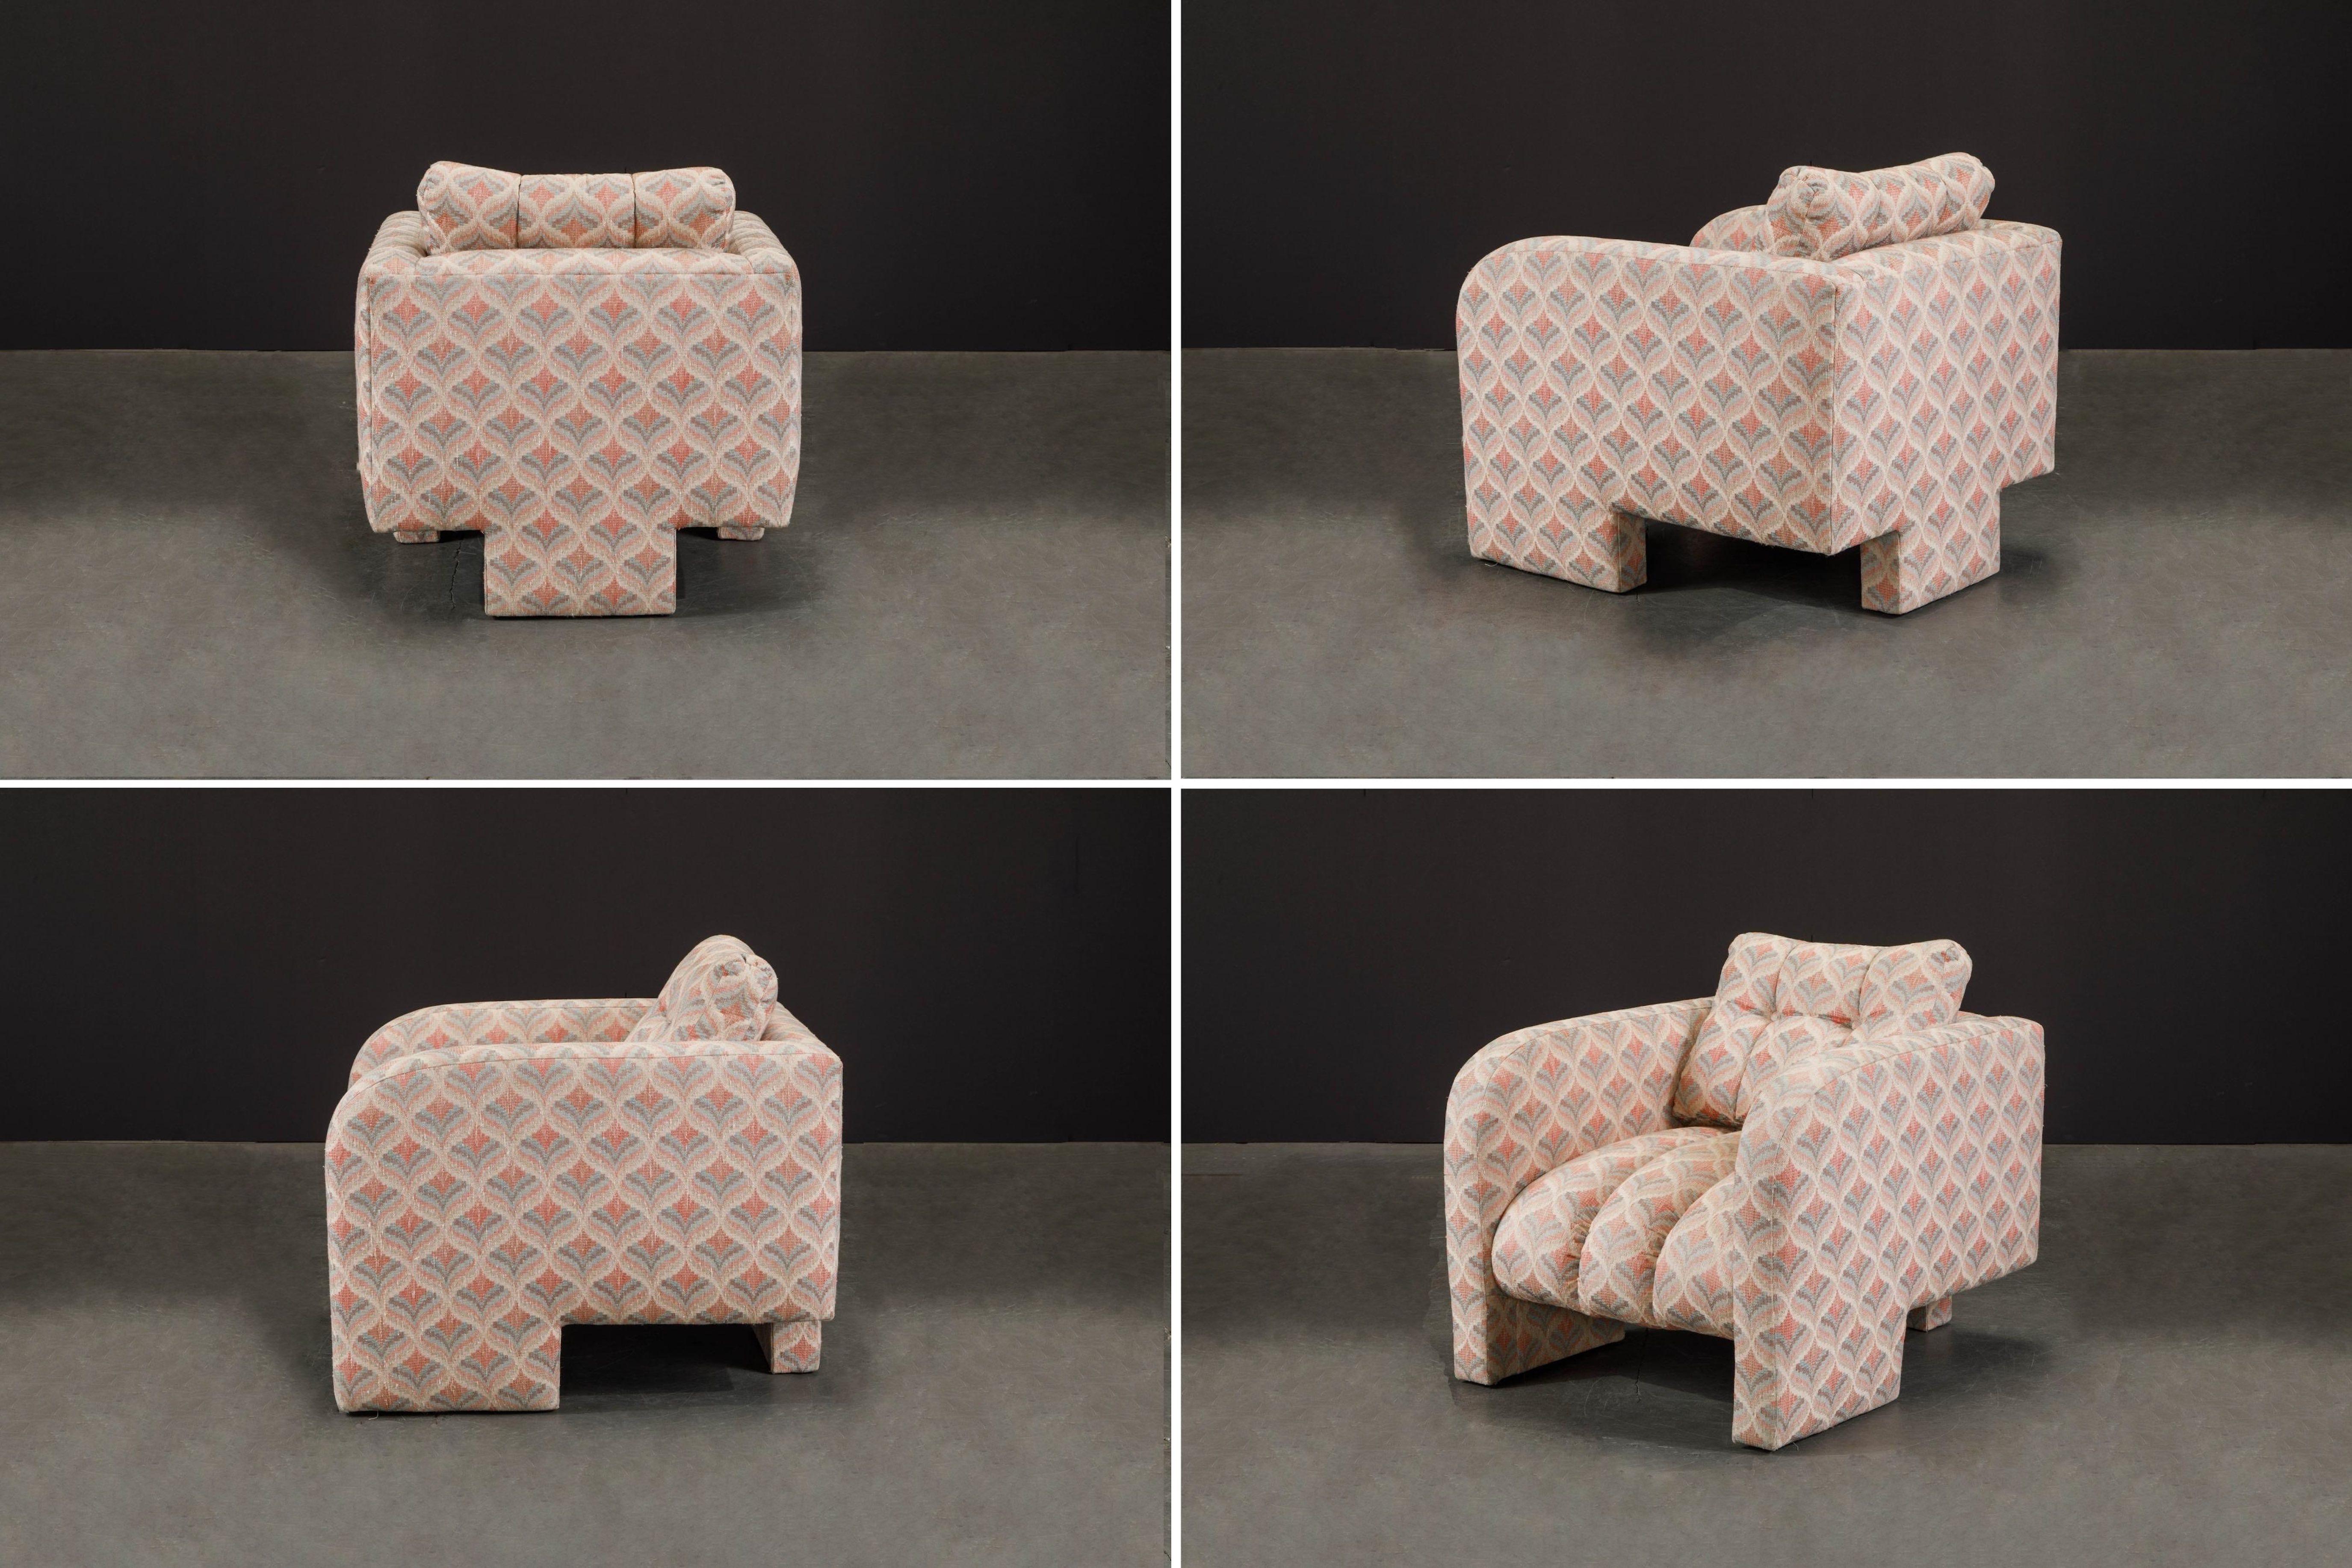 Post-Modern Channel Tufted Lounge Chairs, Attributed to Vladimir Kagan, 1980s For Sale 2